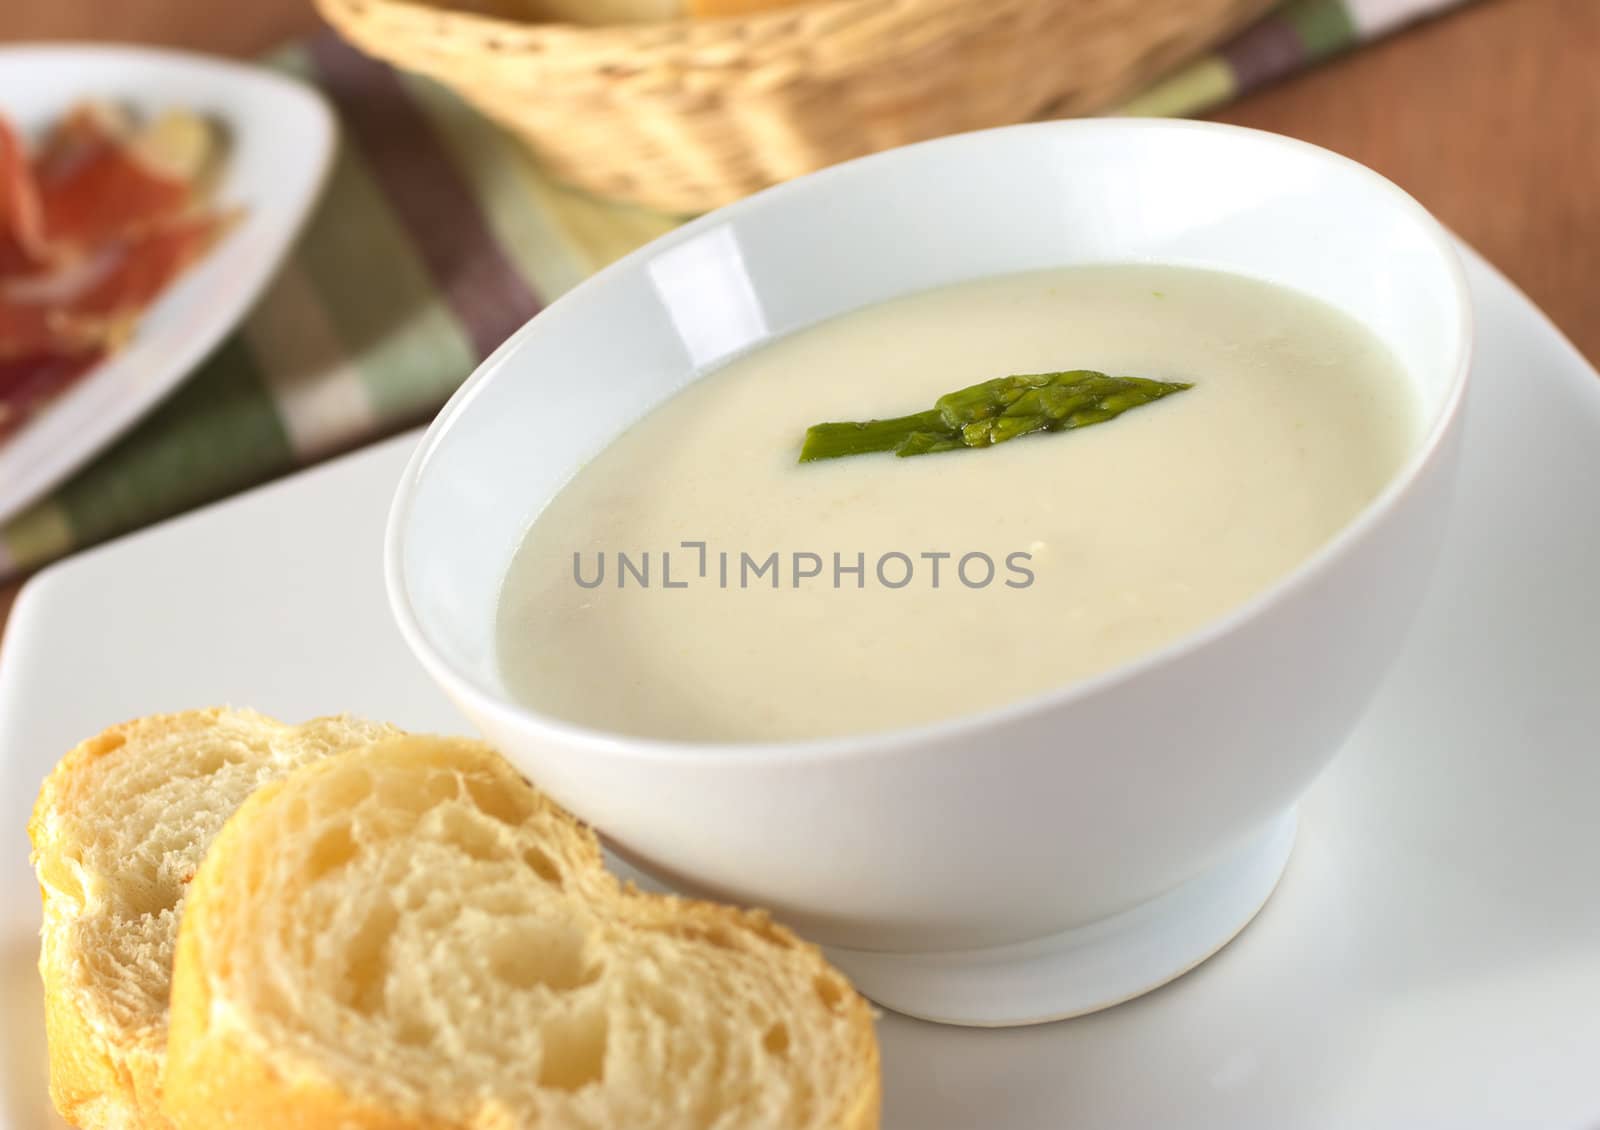 Cream of asparagus with a green asparagus head on top in a white bowl with baguette slices beside (Very Shallow Depth of Field, Focus on the asparagus head in the soup)